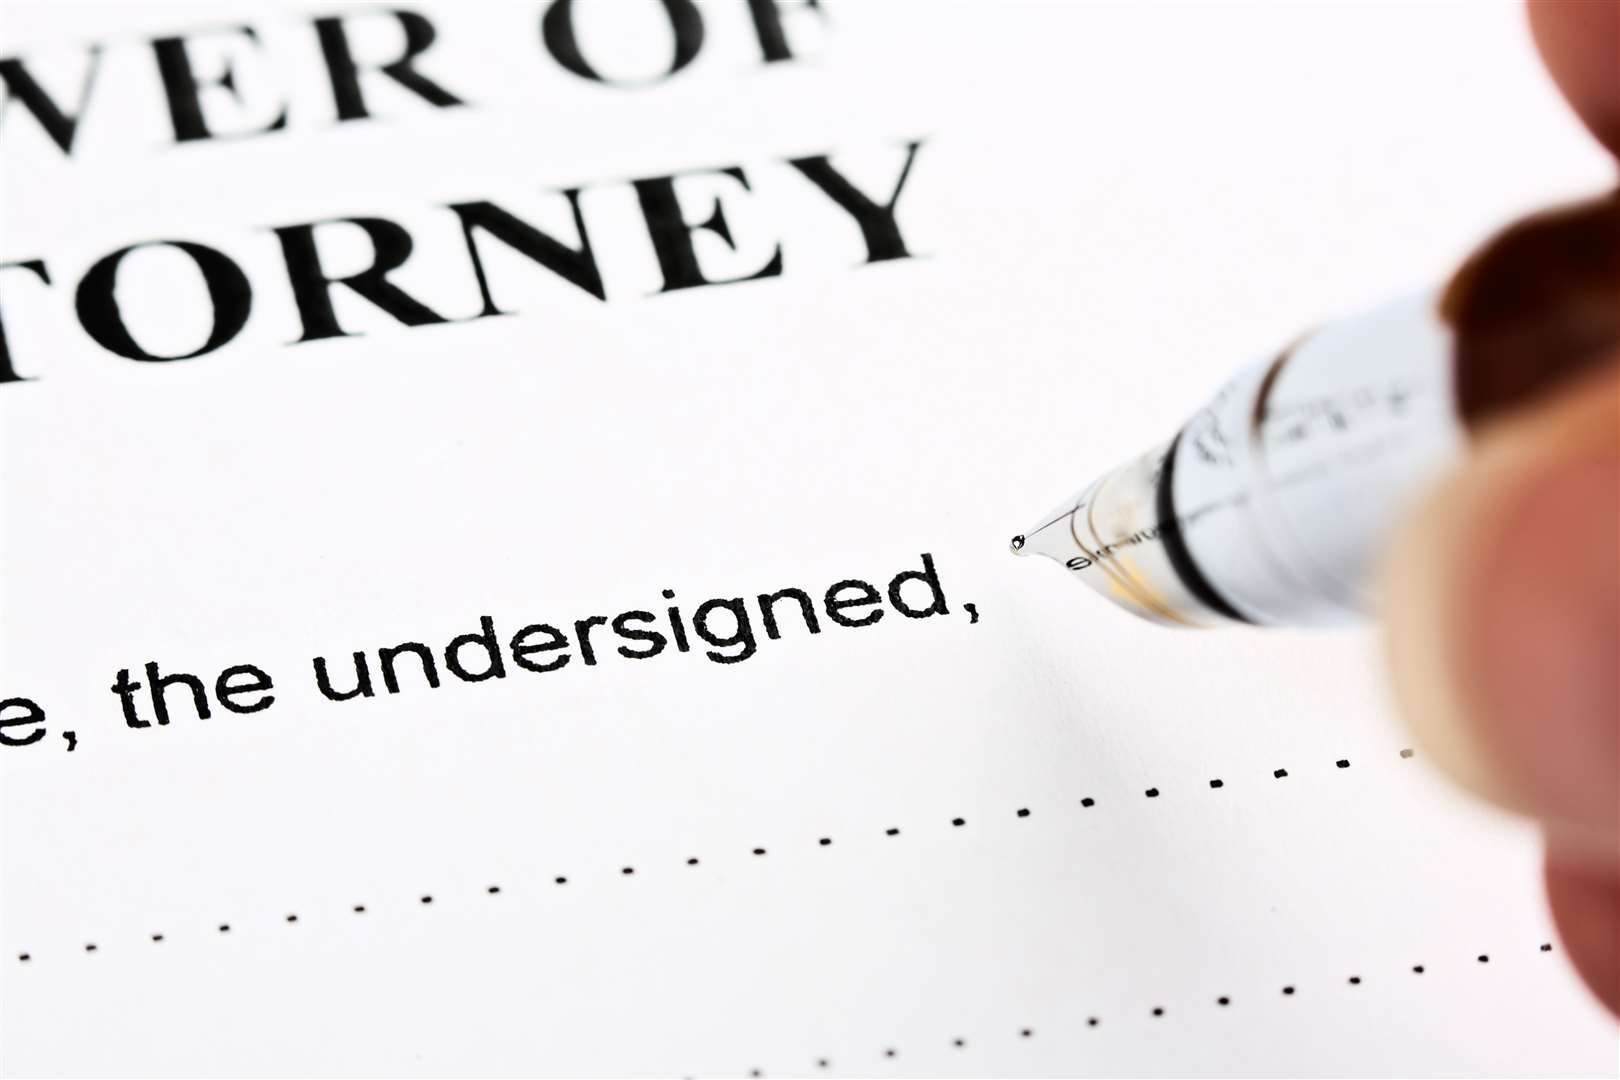 Power of Attorney is a legal document which allows someone to take care of your personal affairs